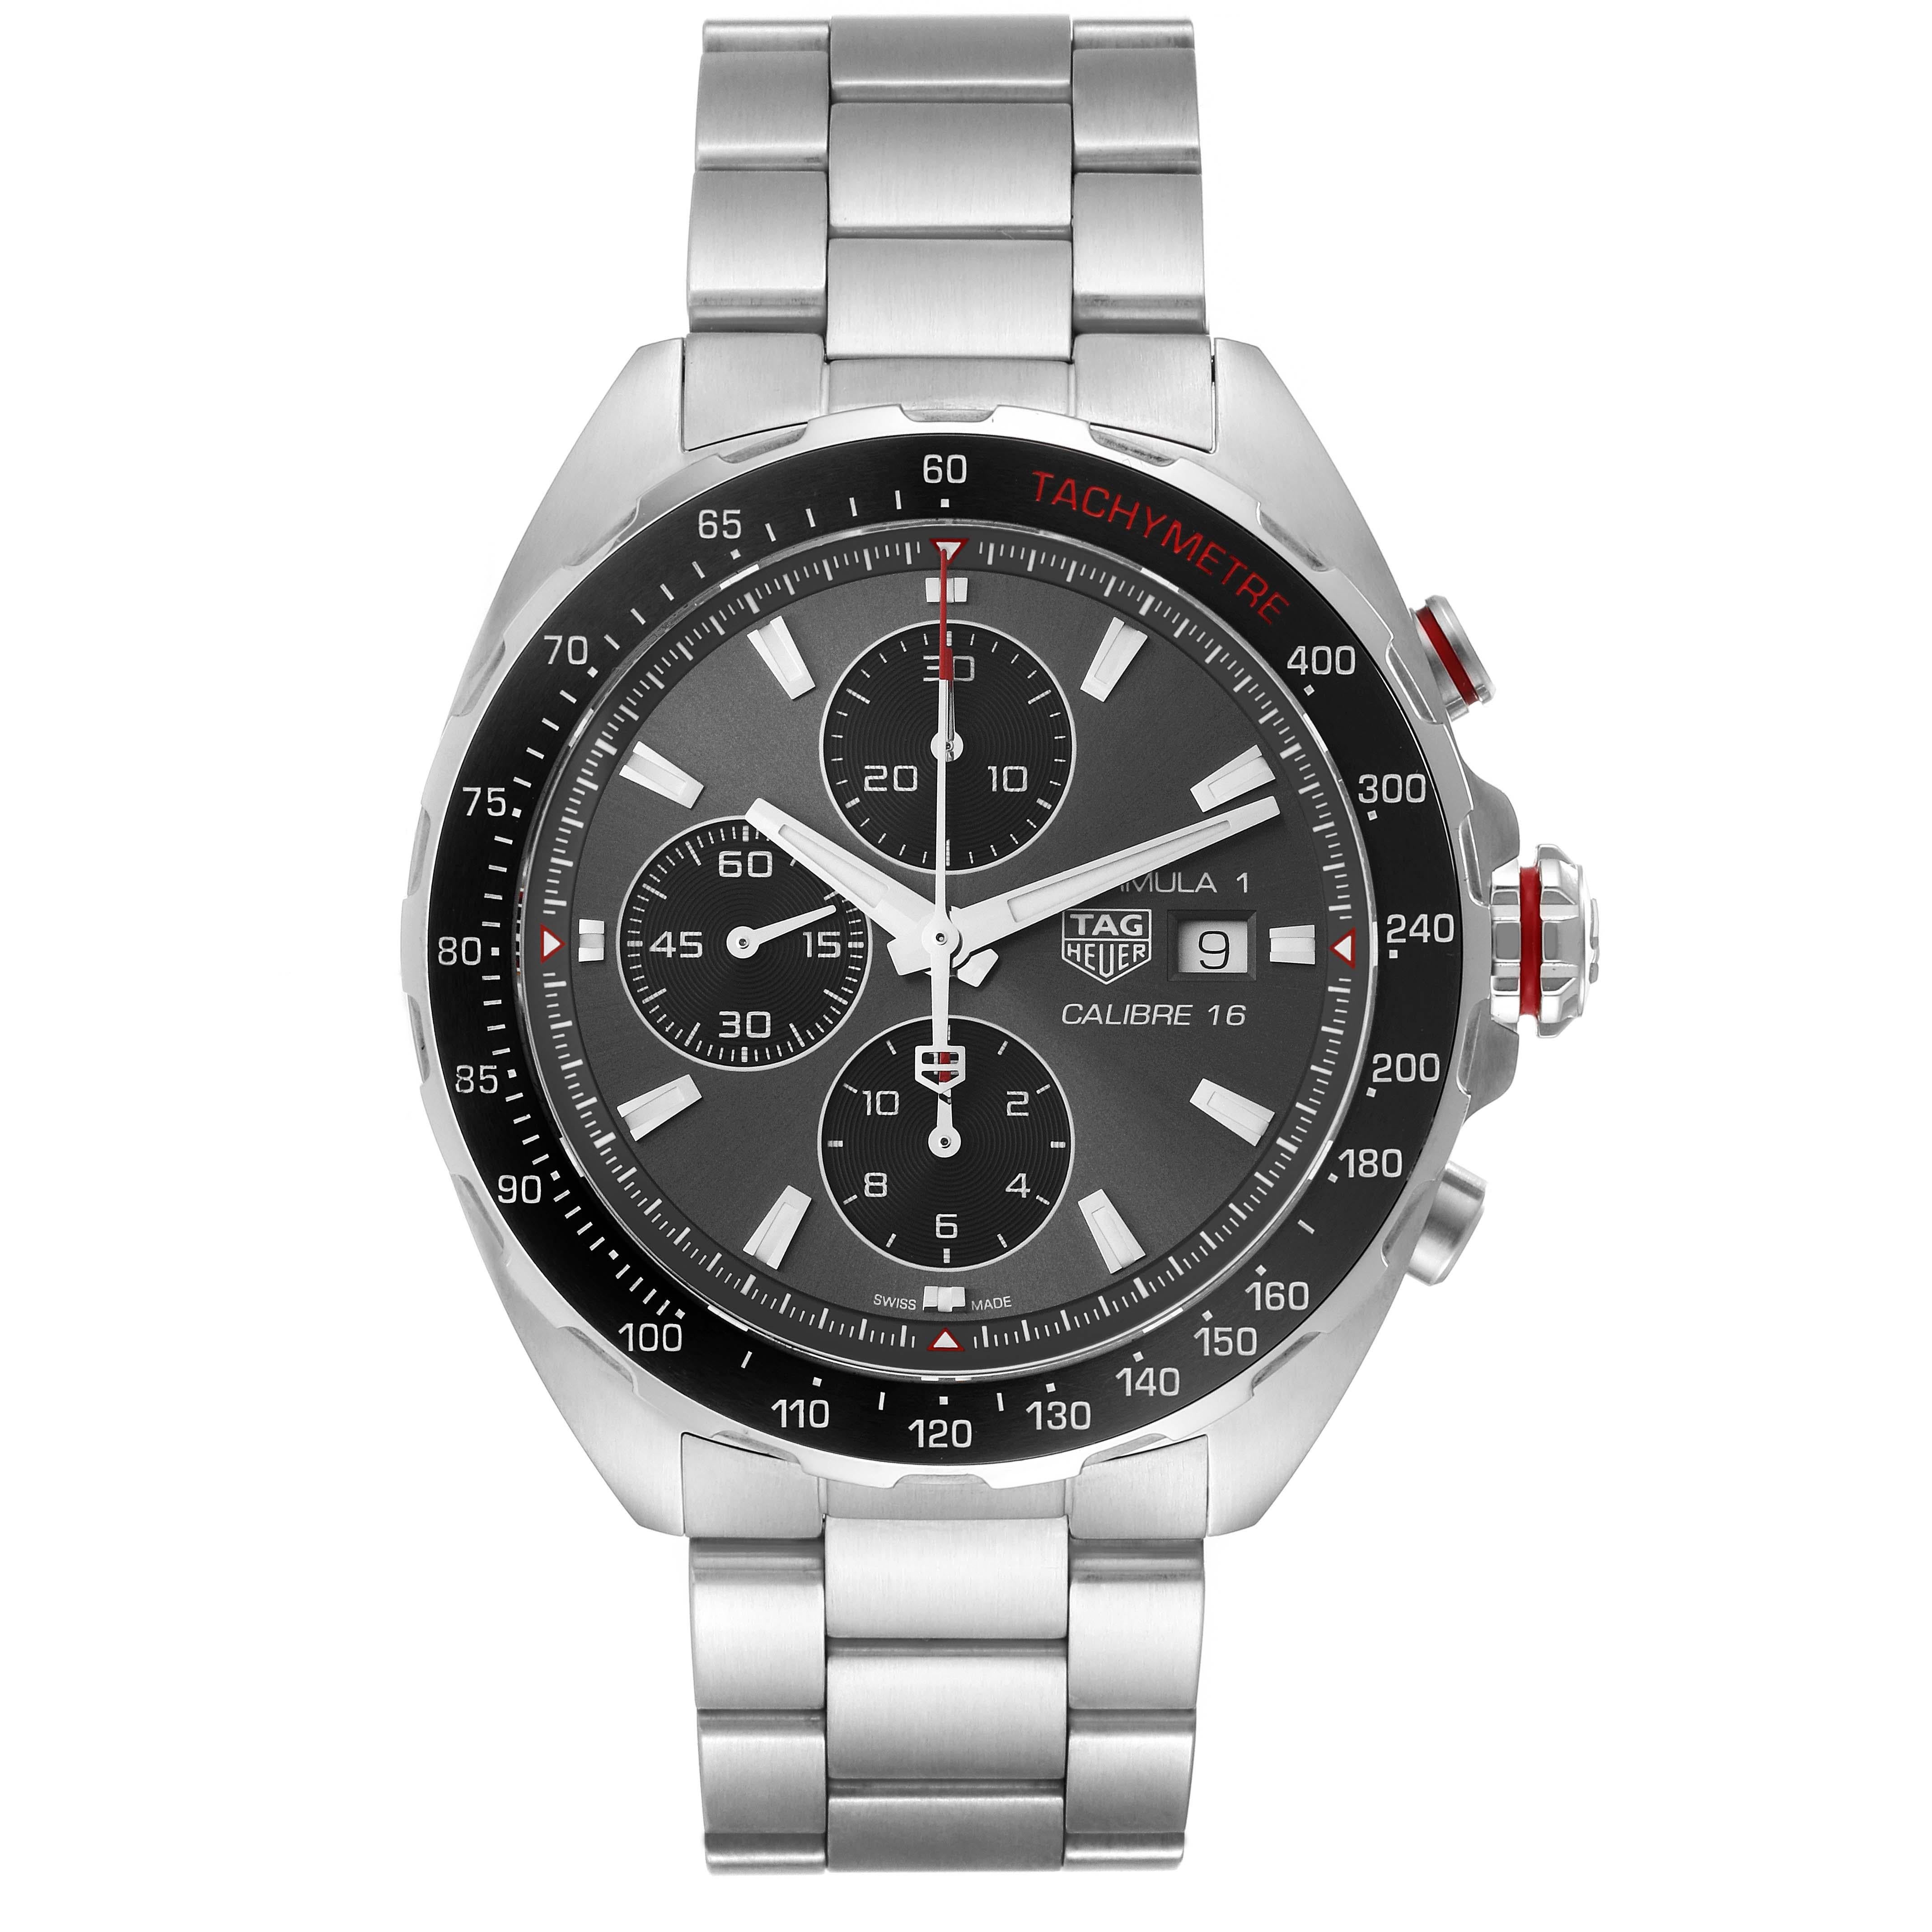 Tag Heuer Formula 1 Chronograph Steel Mens Watch CAZ2012 Box Card. Automatic self-winding chronograph movement. Stainless steel case 44.0 mm in diameter. Black ceramic bezel with tachymeter scale. Scratch resistant sapphire crystal. Anthracite grey